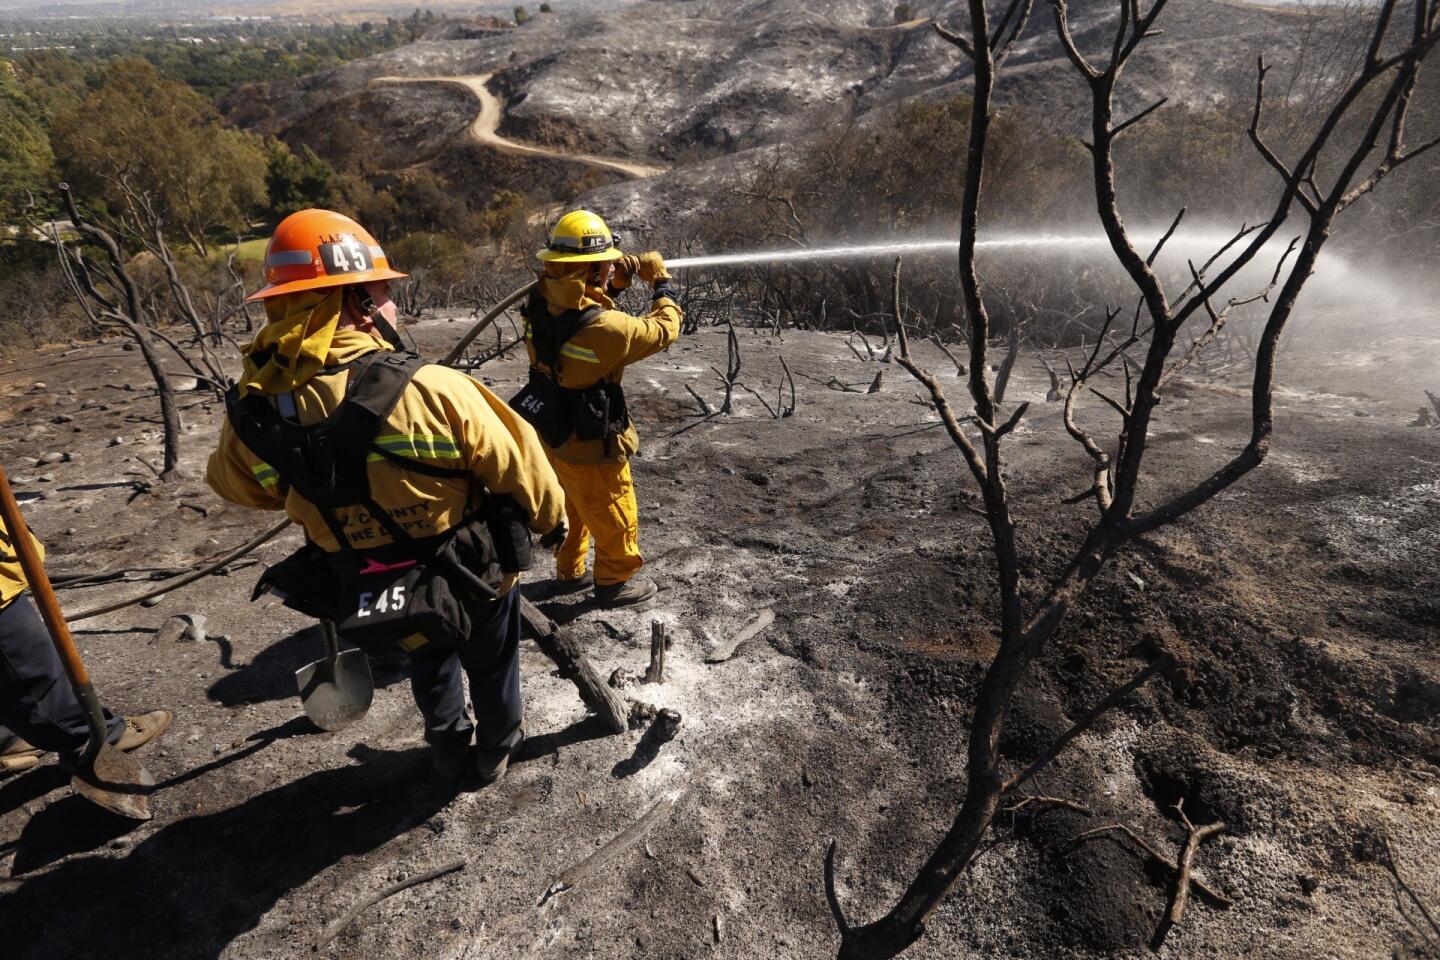 LA County Fire Engineer Todd Jameson and Captain Ritchie Salisbury, left, water down hot spots on the burned hillside of the Hidden Valley neighborhood in Santa Clarita Thursday morning.